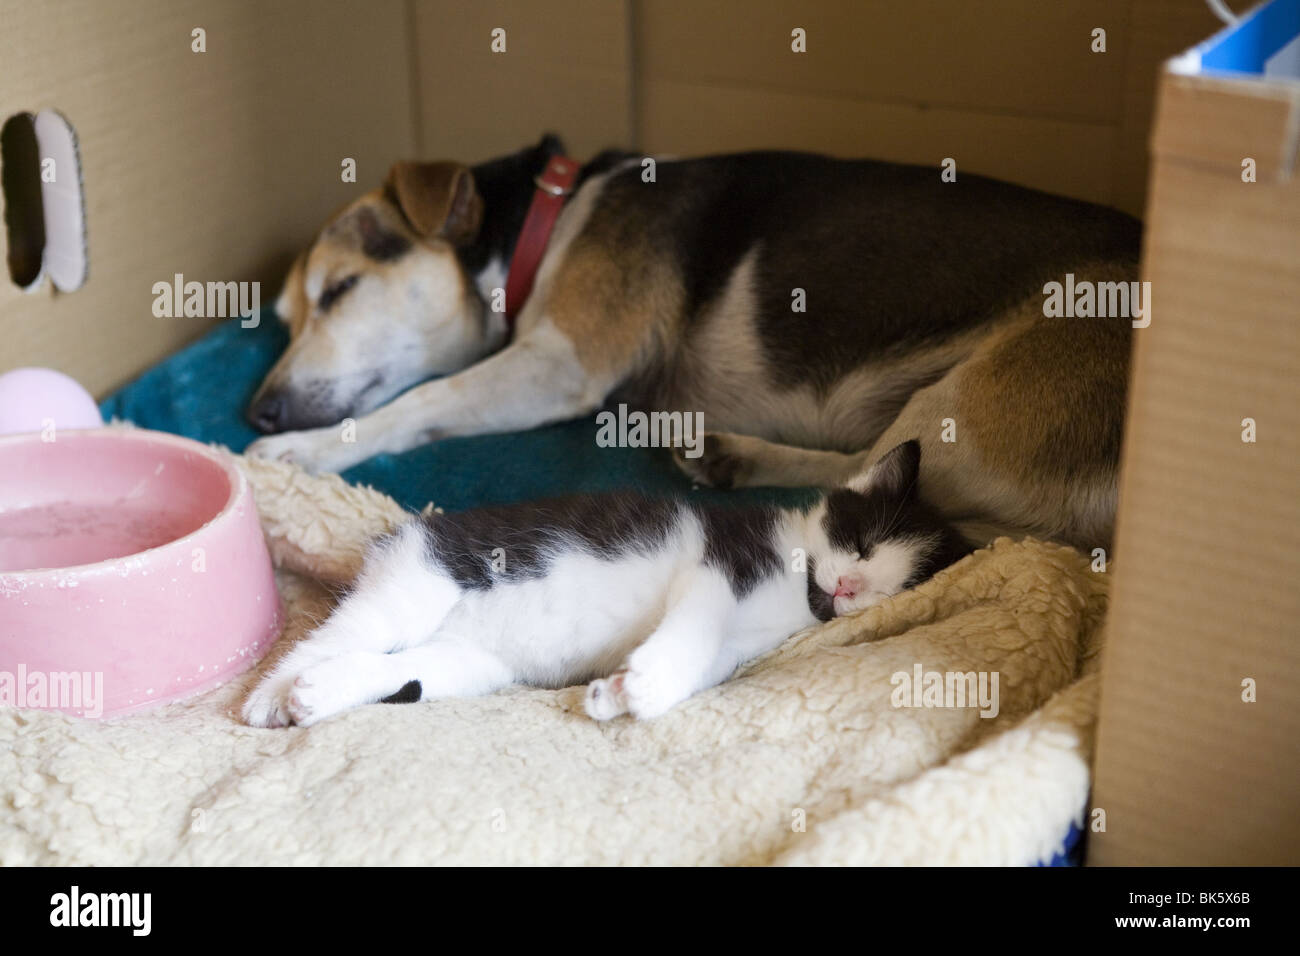 Cat and dog asleep, these two animals are sleeping together in a carton box Stock Photo